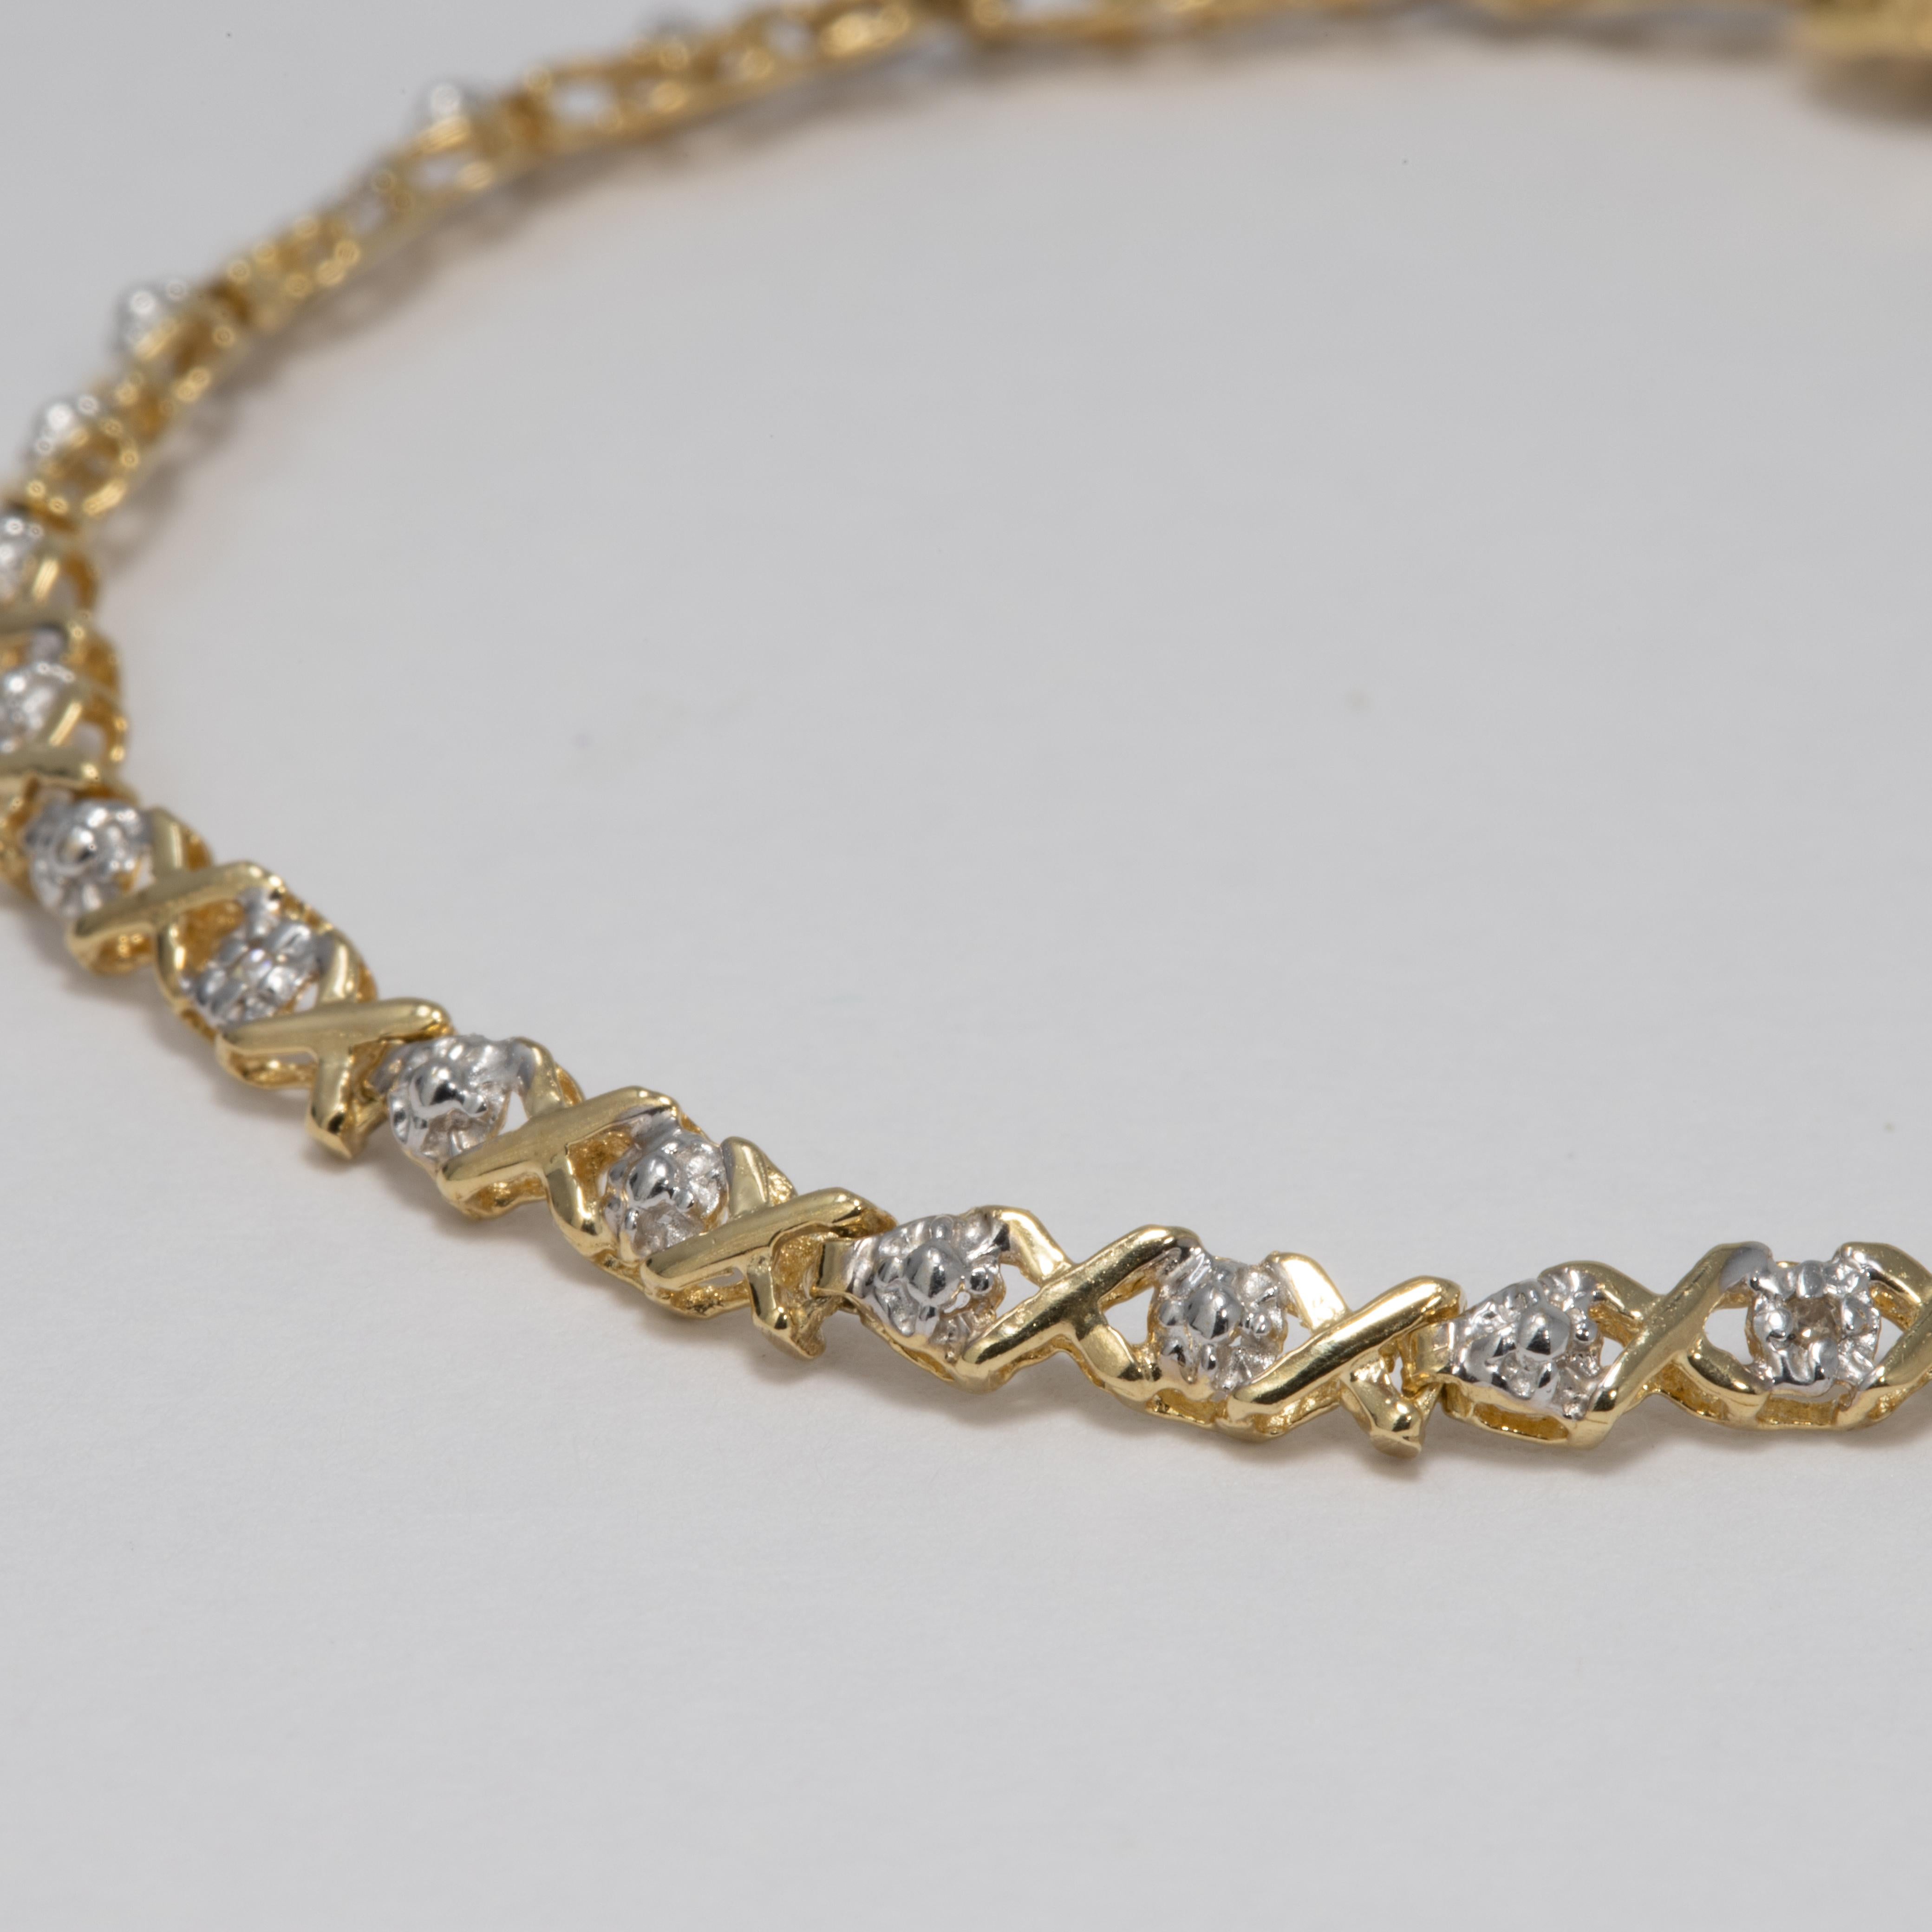 14 Karat Yellow and White Gold Link Bracelet with Diamond Accents 1